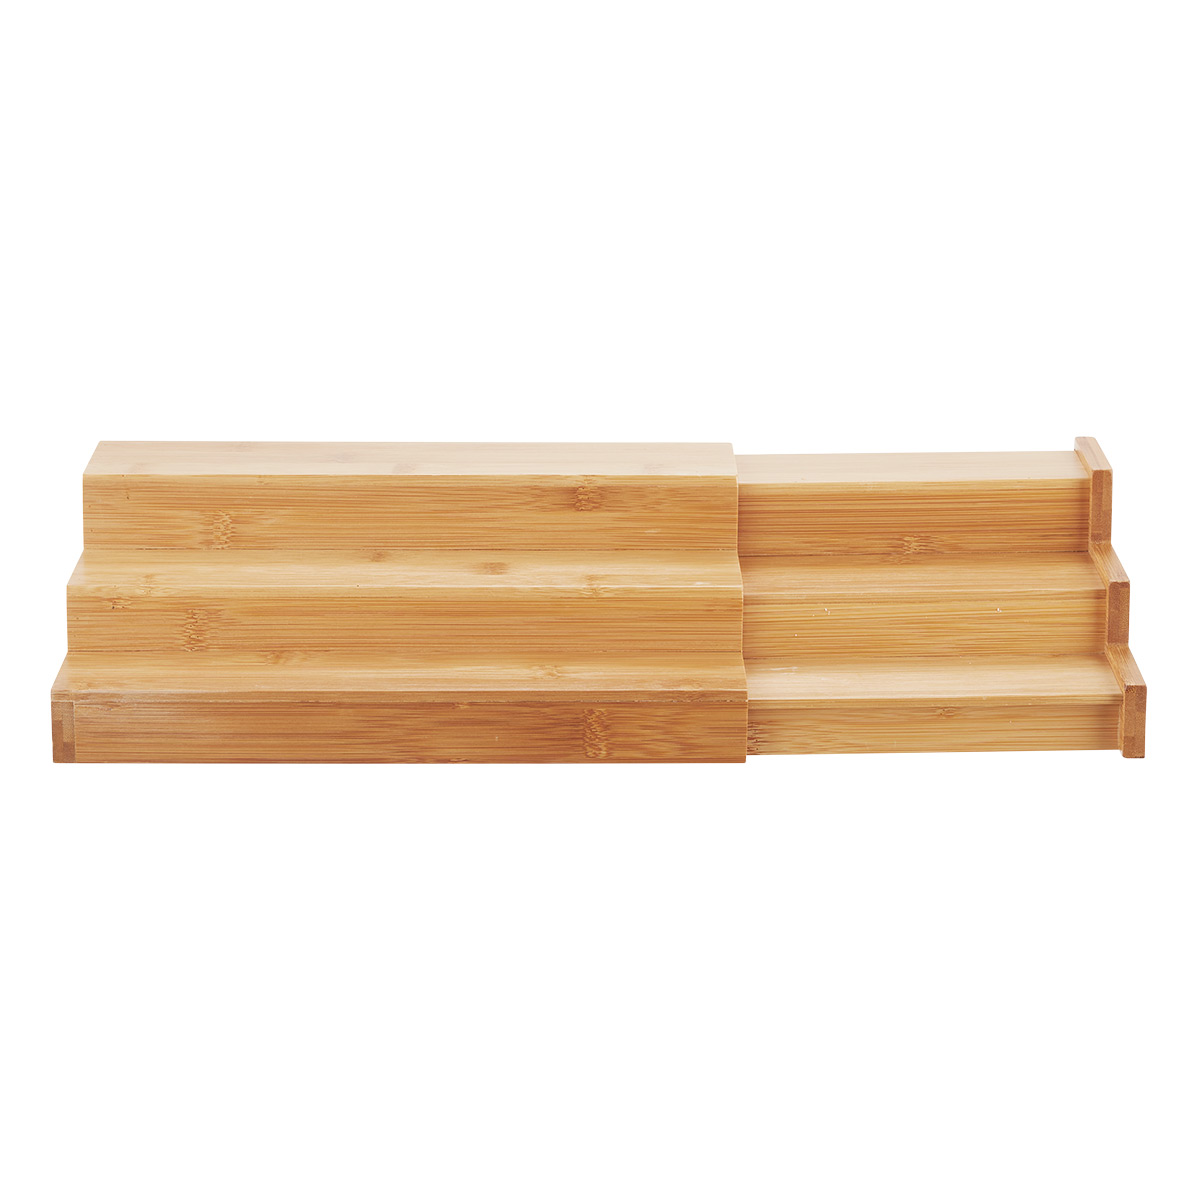 https://www.containerstore.com/catalogimages/515282/10079571-3-tier-bamboo-expanding-spi.jpg